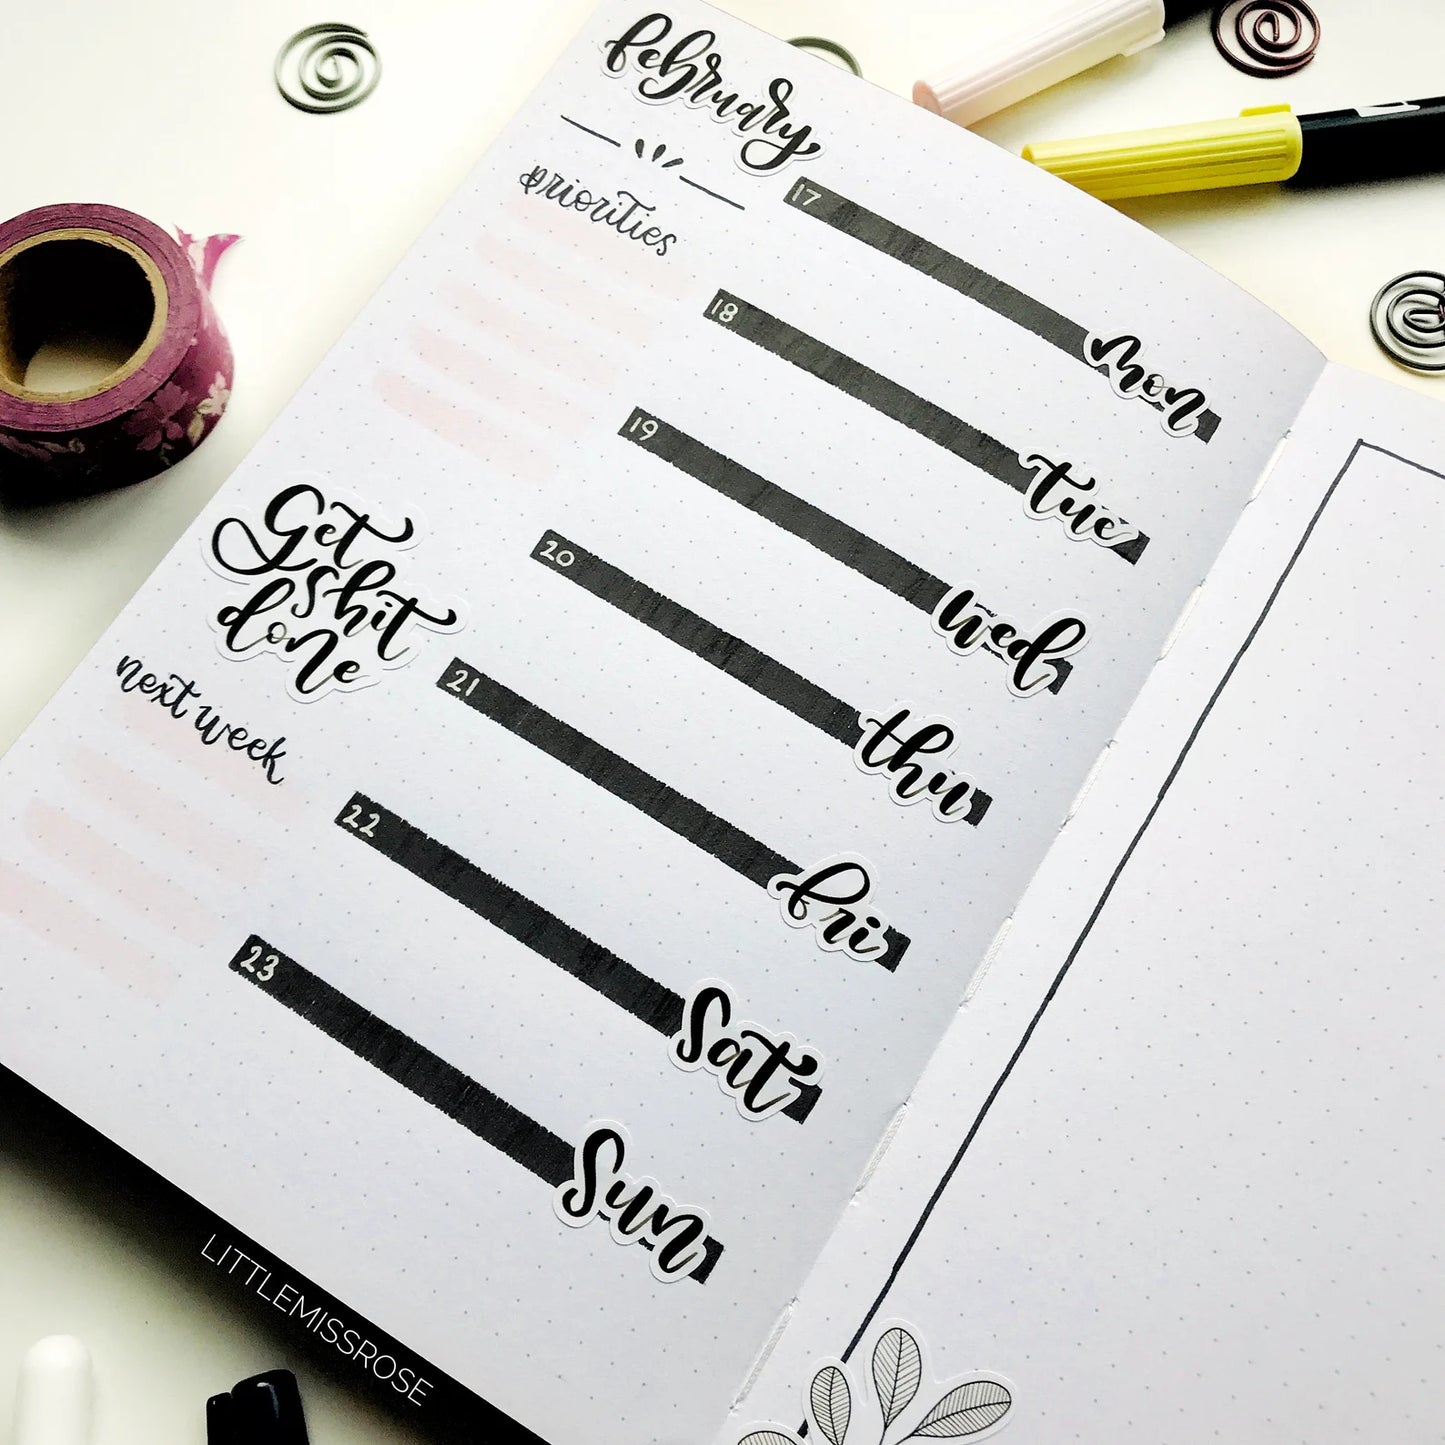 W003 Short Weekday Script Planner Stickers by Rose K - example of use